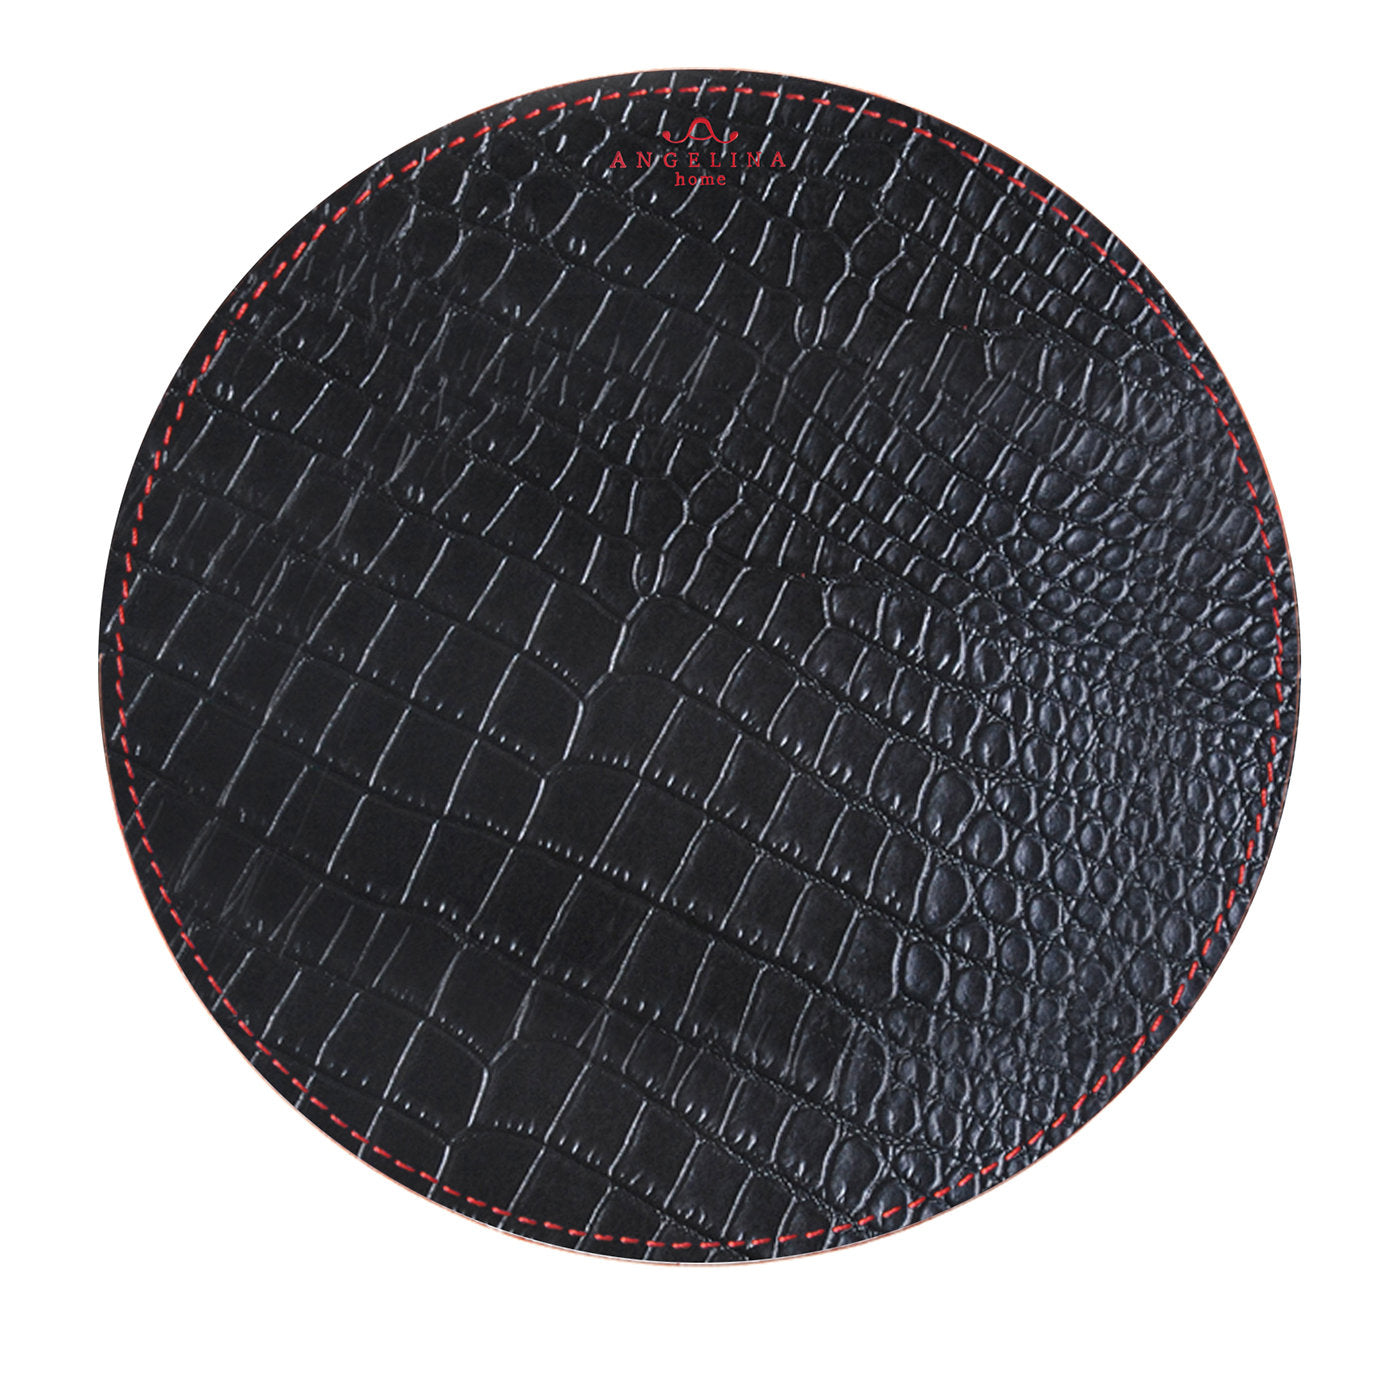 Kenya Small Set of 2 Round Black Leather Placemats - Alternative view 1